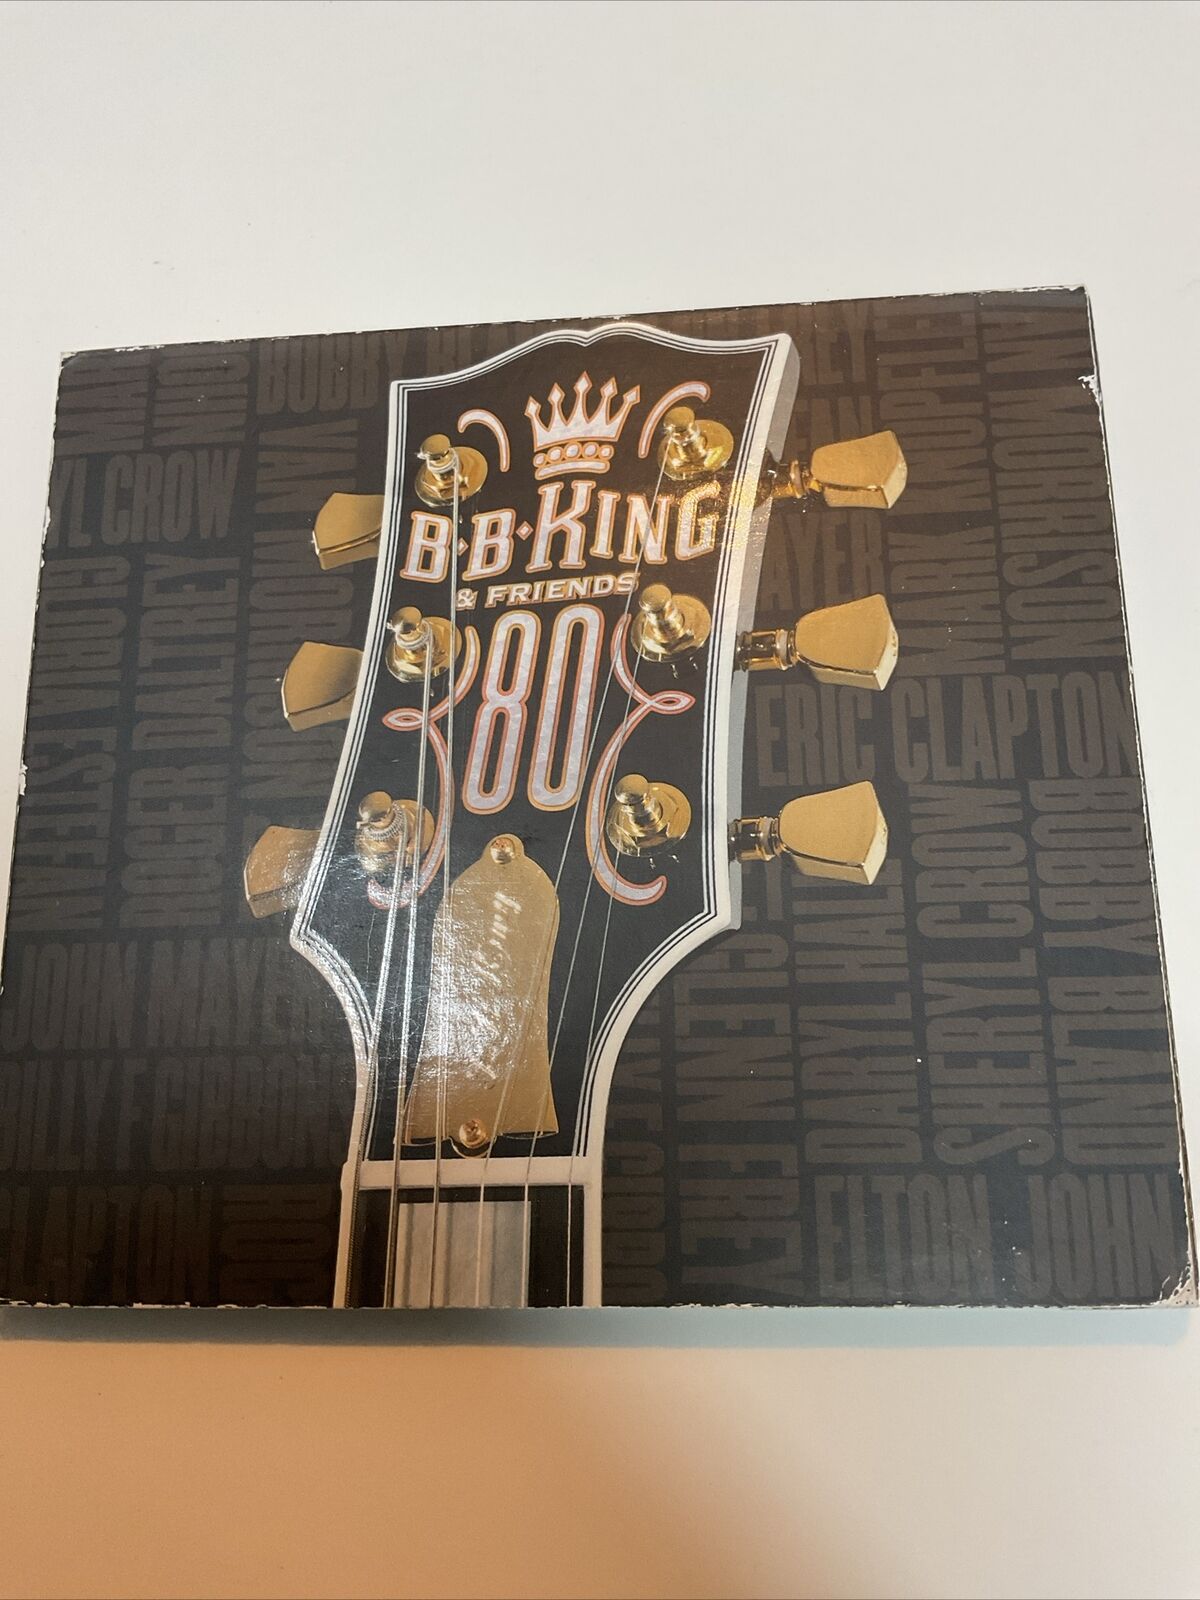 BB King & Friends - 80, CD, Pre-Owned, Tested, Sounds Great